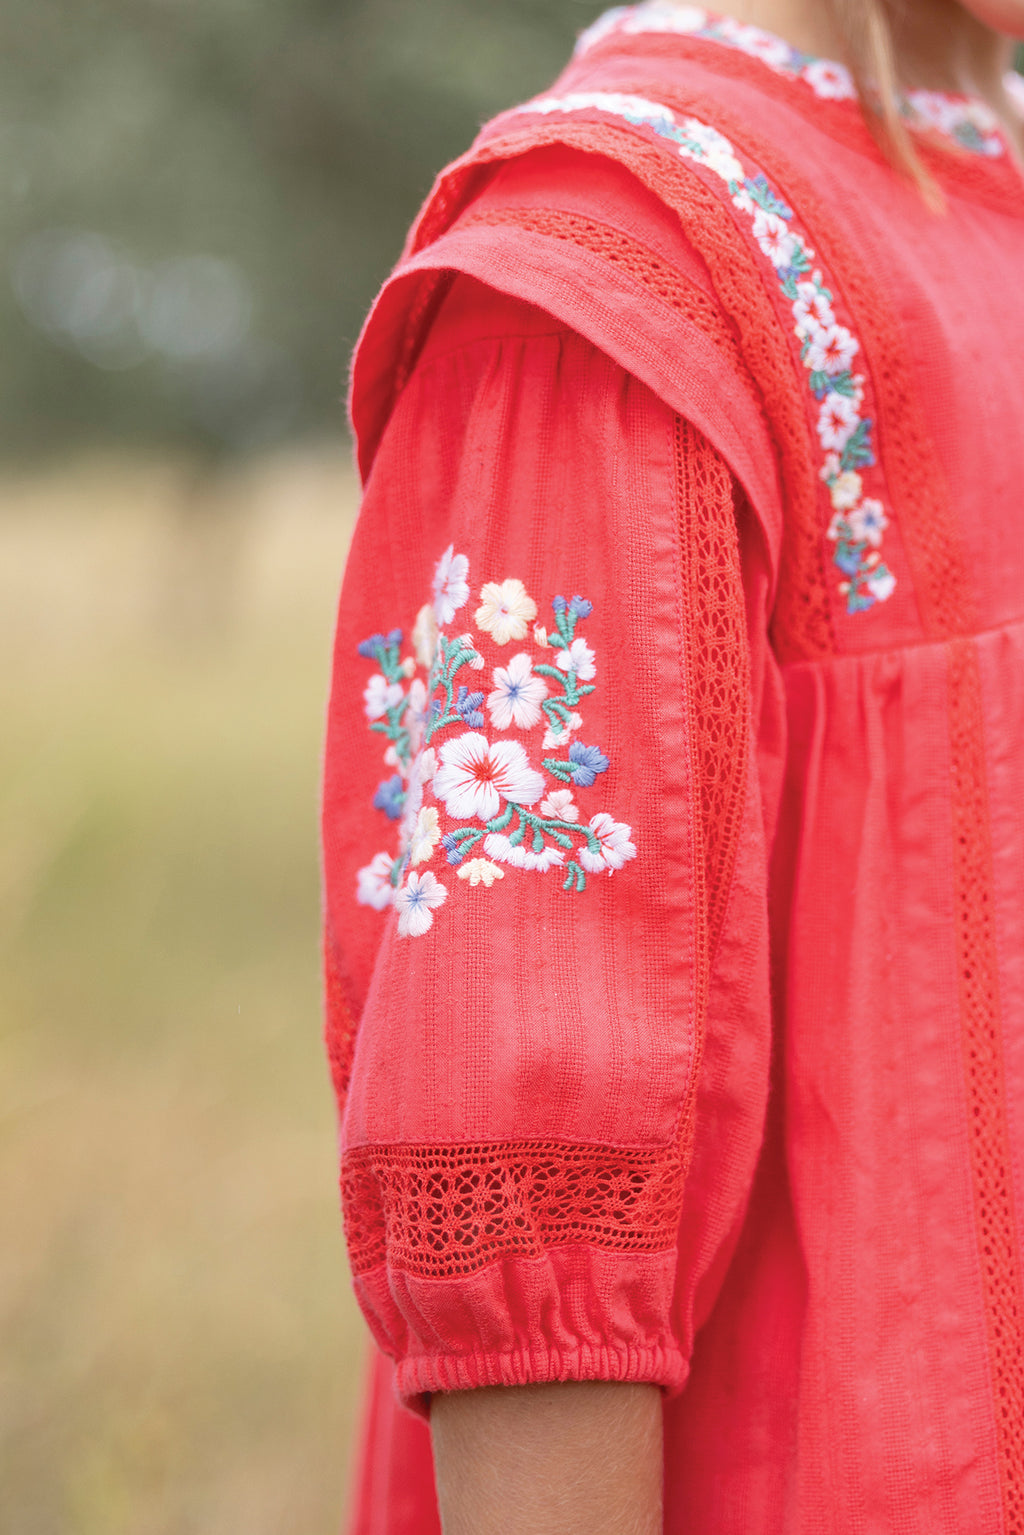 Dress - Red Floral embroidery